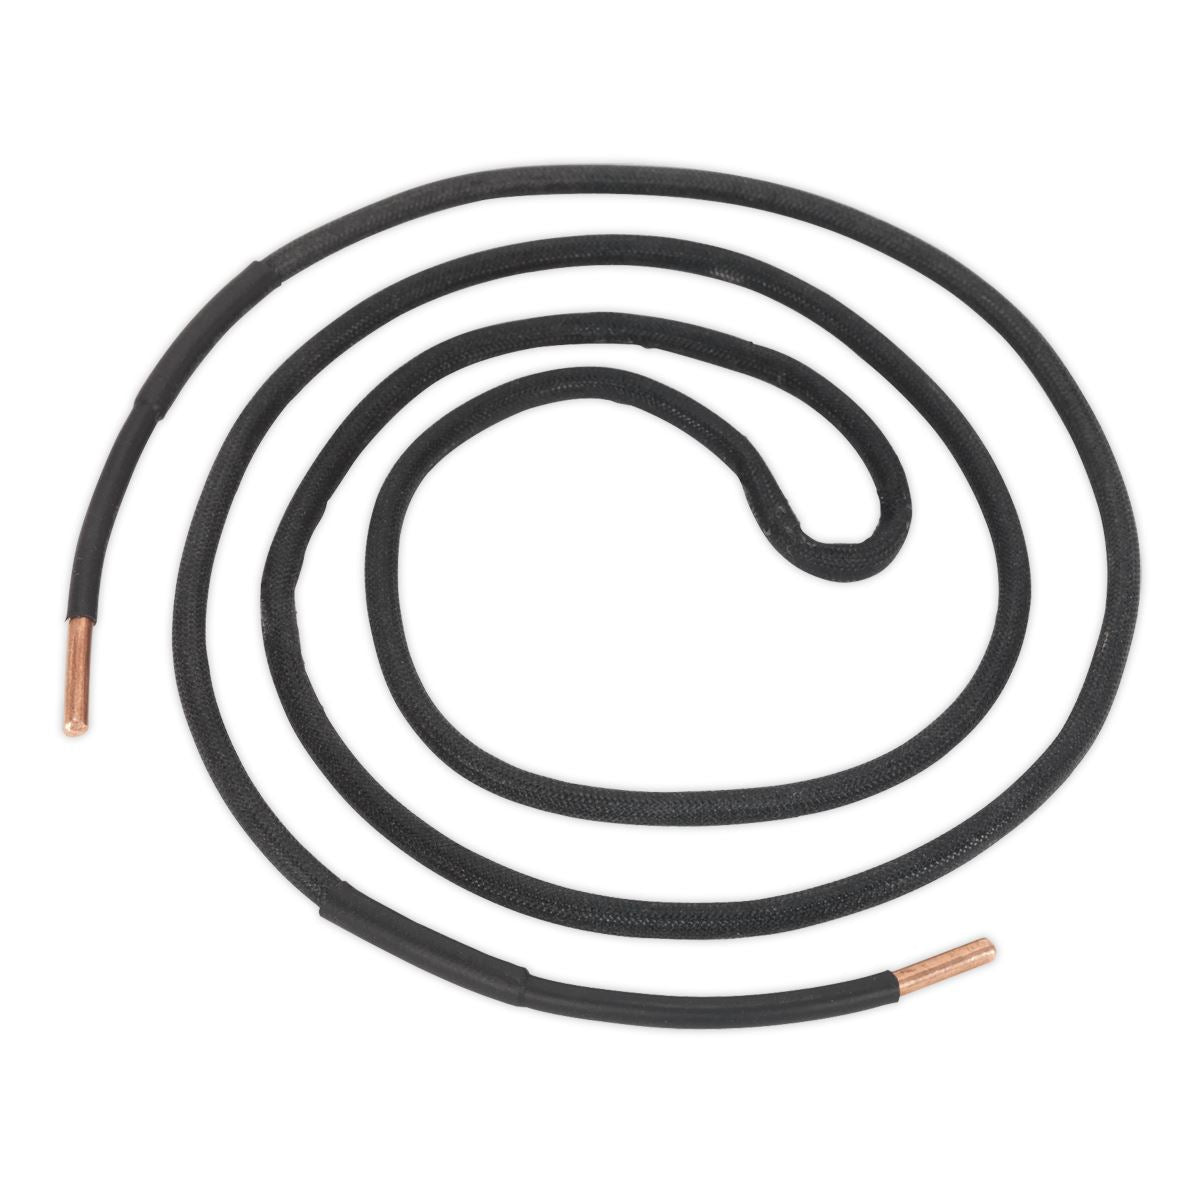 Sealey Induction Coil - Flexible 920mm